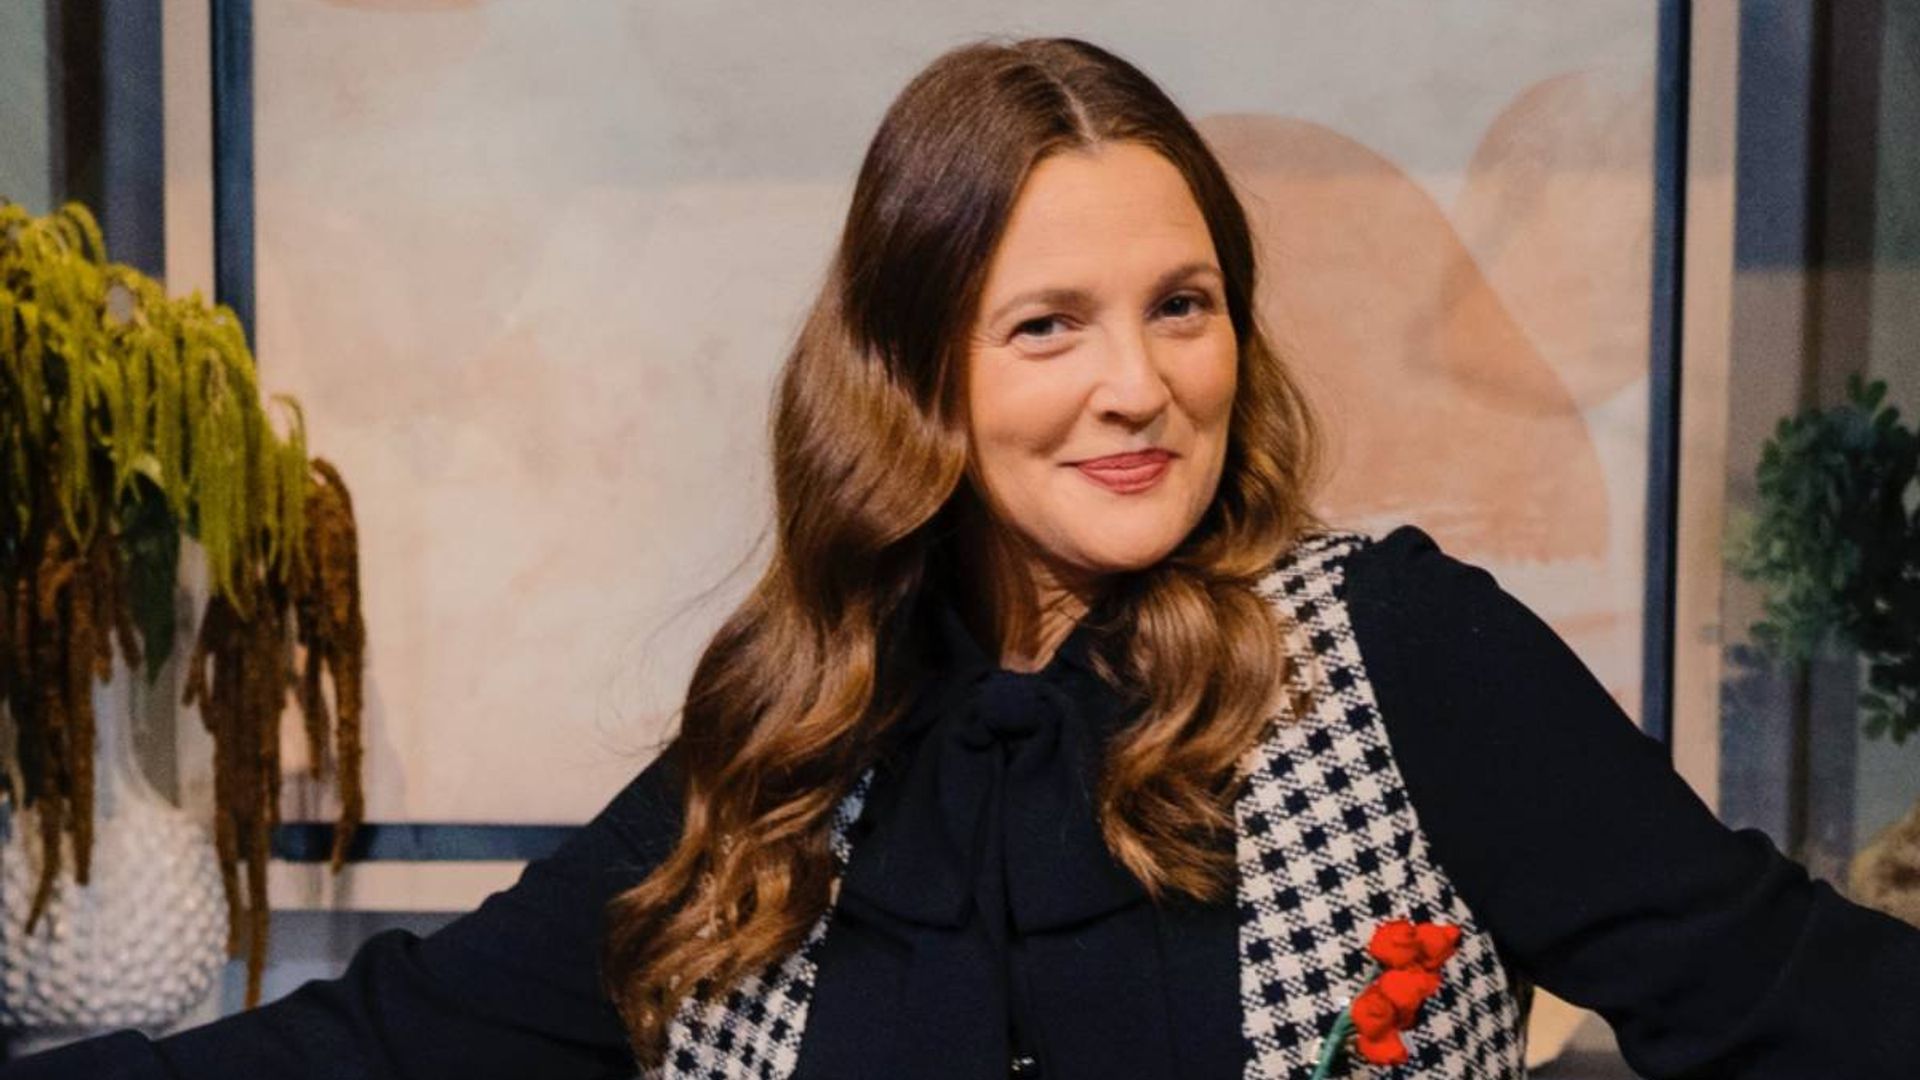 Drew Barrymore reveals how she proposed to a beloved star after three decades of friendship